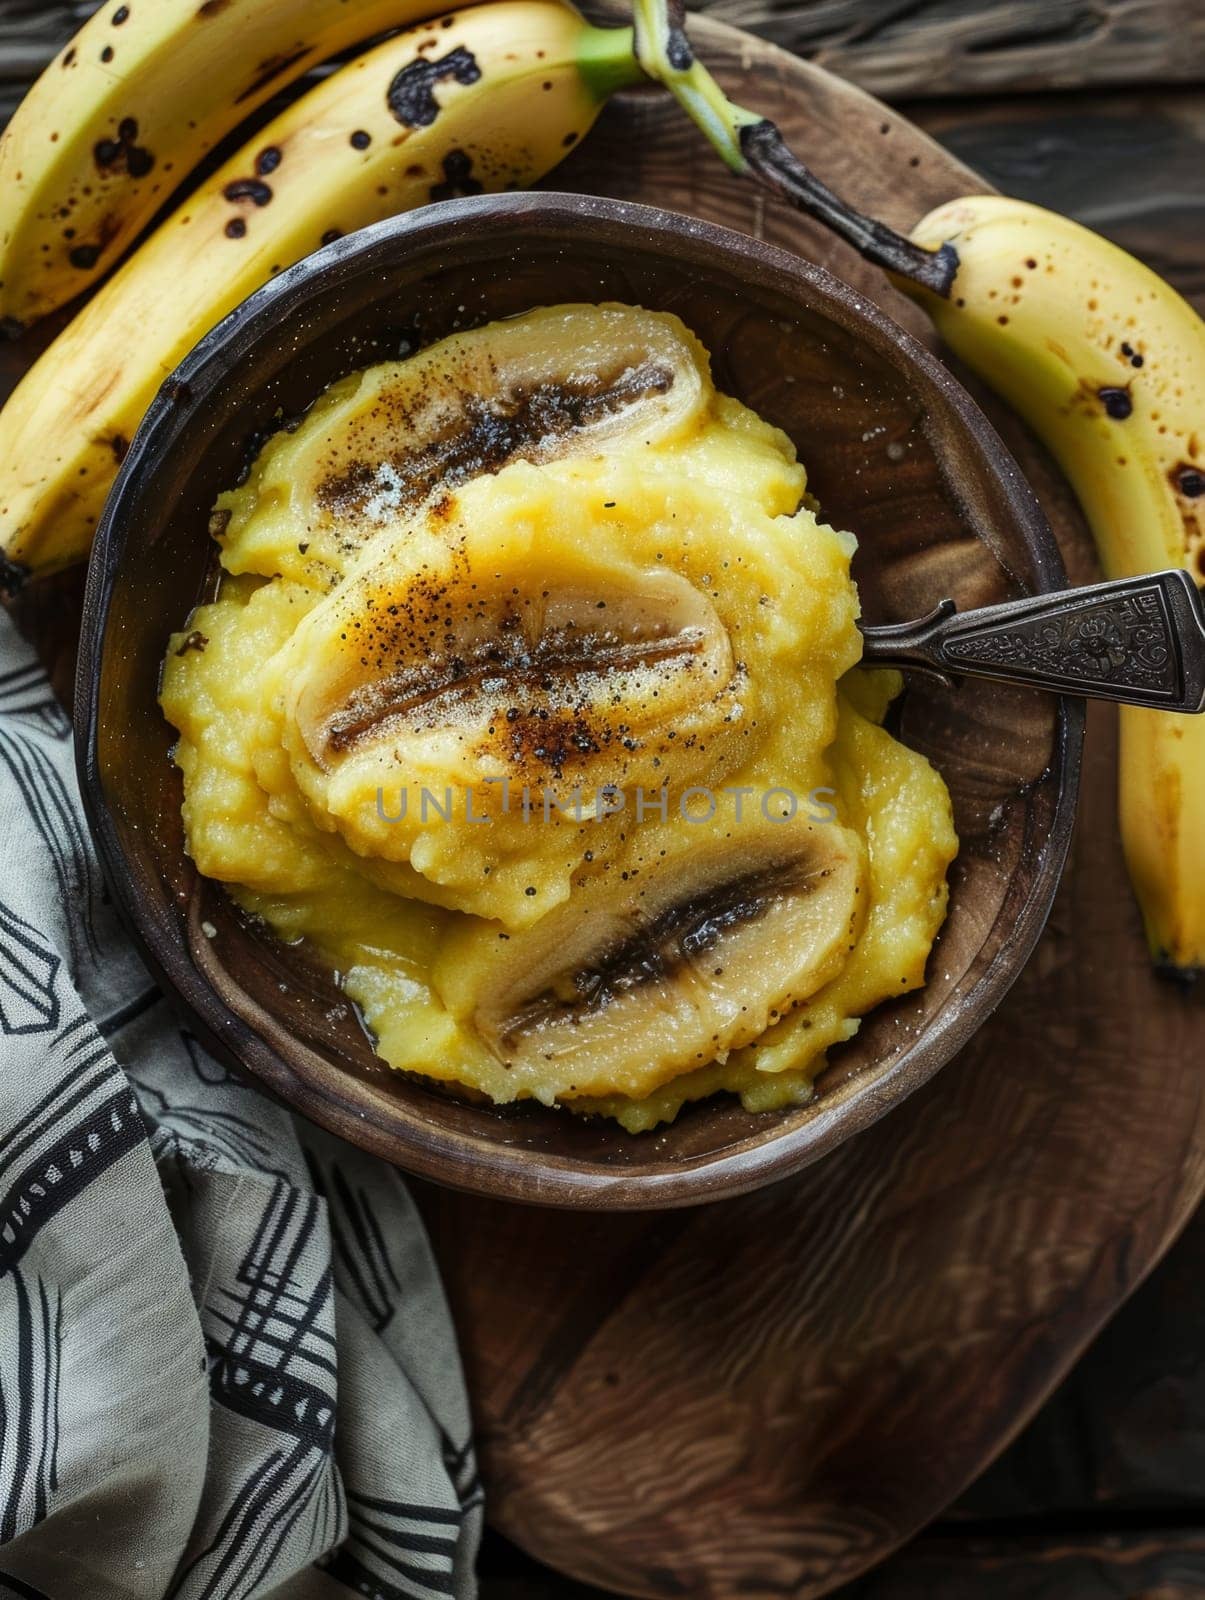 Authentic Ugandan matoke, a hearty dish of cooked and mashed green bananas, served in a traditional bowl - a nourishing and delicious representation of the rich culinary traditions of Africa